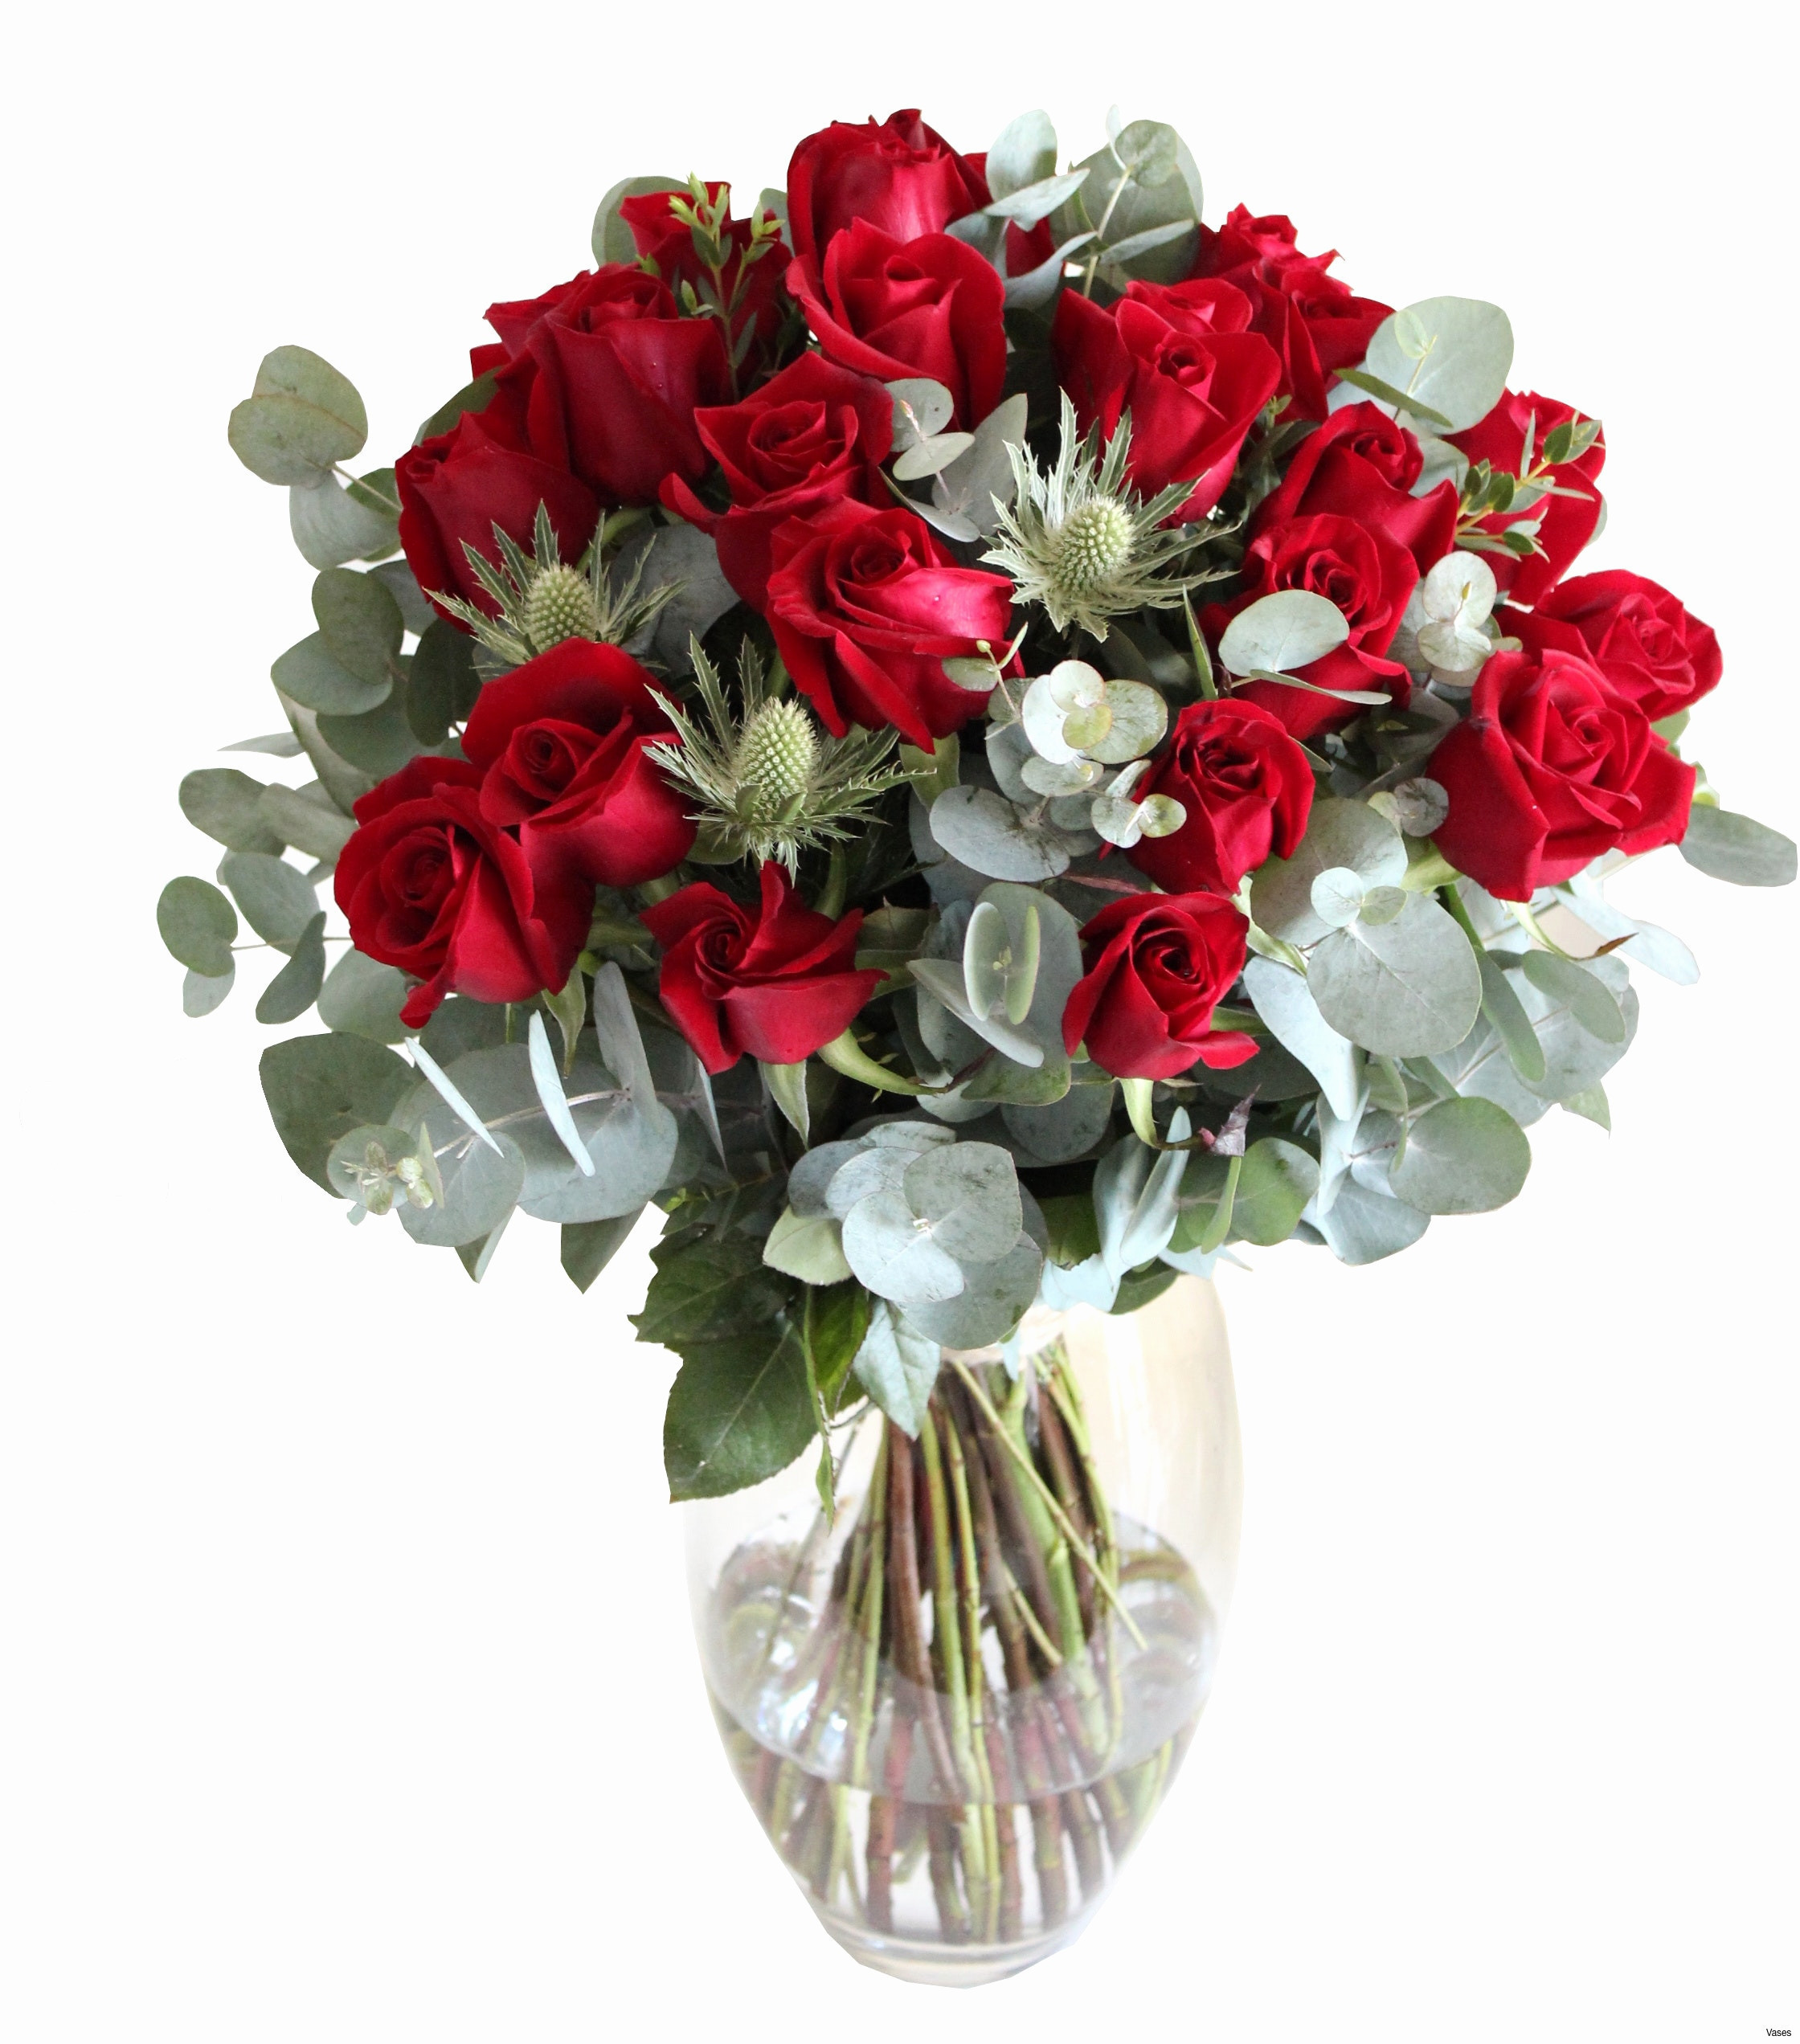 11 Great Artificial Red Roses In Vase 2024 free download artificial red roses in vase of 24 glass vase pics to color fresh 24 red roses in vaseh vases i 0d throughout 24 glass vase pics to color fresh 24 red roses in vaseh vases i 0d to color desi